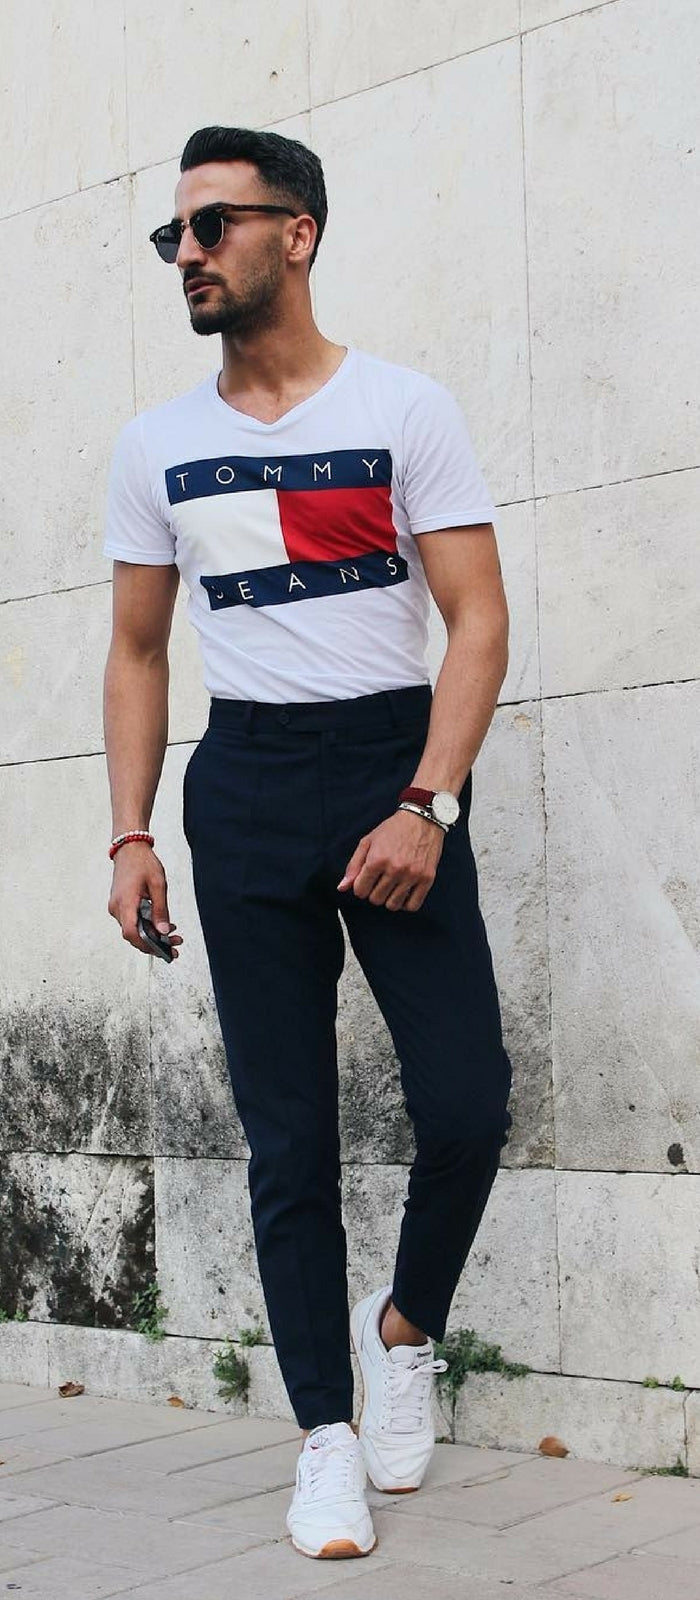 11 Smart & Edgy Outfit Ideas For Men - LIFESTYLE BY PS